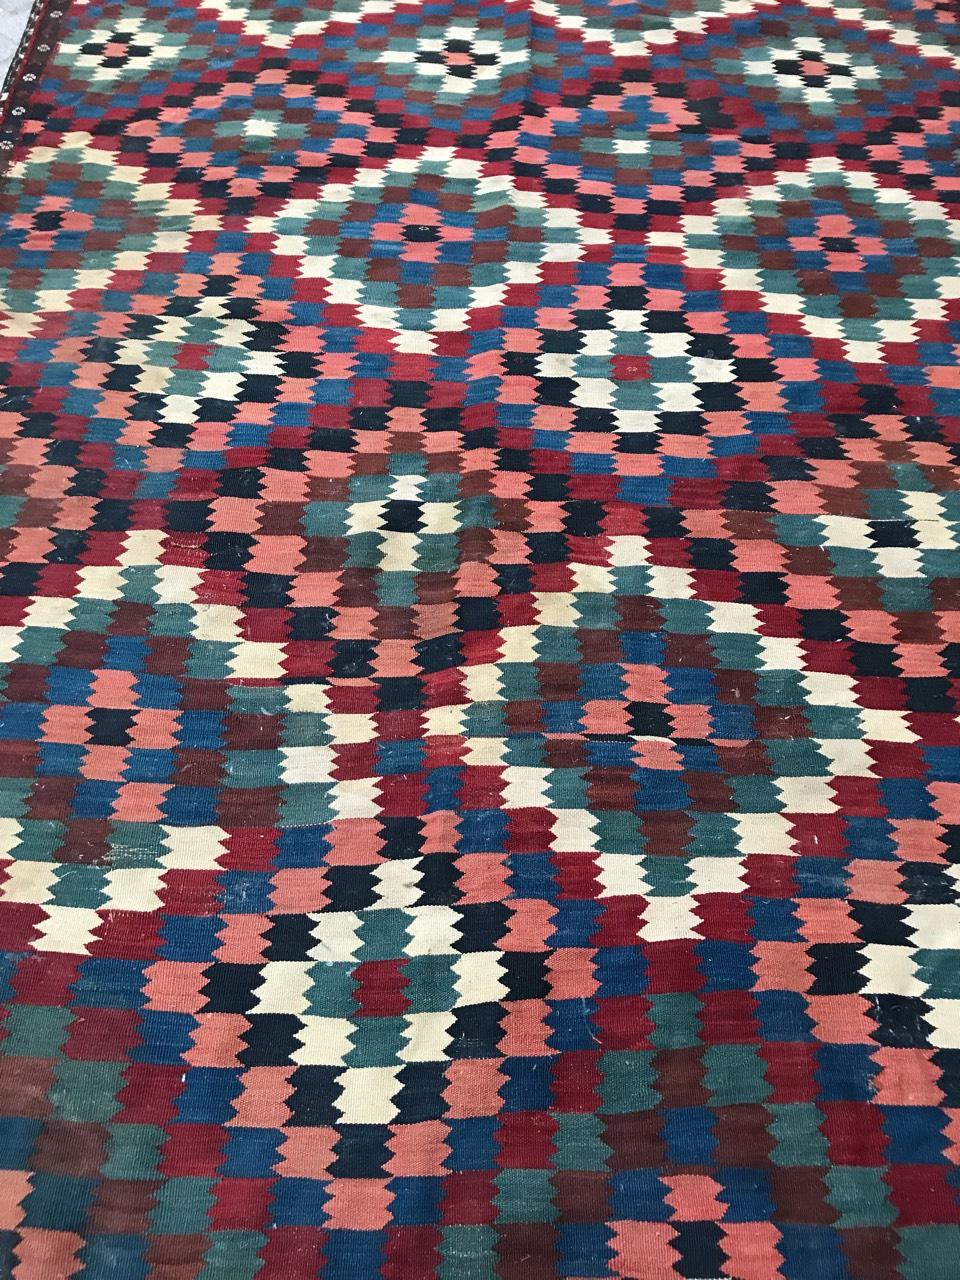 Very beautiful large Kilim, late 19th century with a wonderful geometrical design and nice natural colors, with blue, red, pink, brown and green. Entirely handwoven with wool on wool foundation.

✨✨✨
